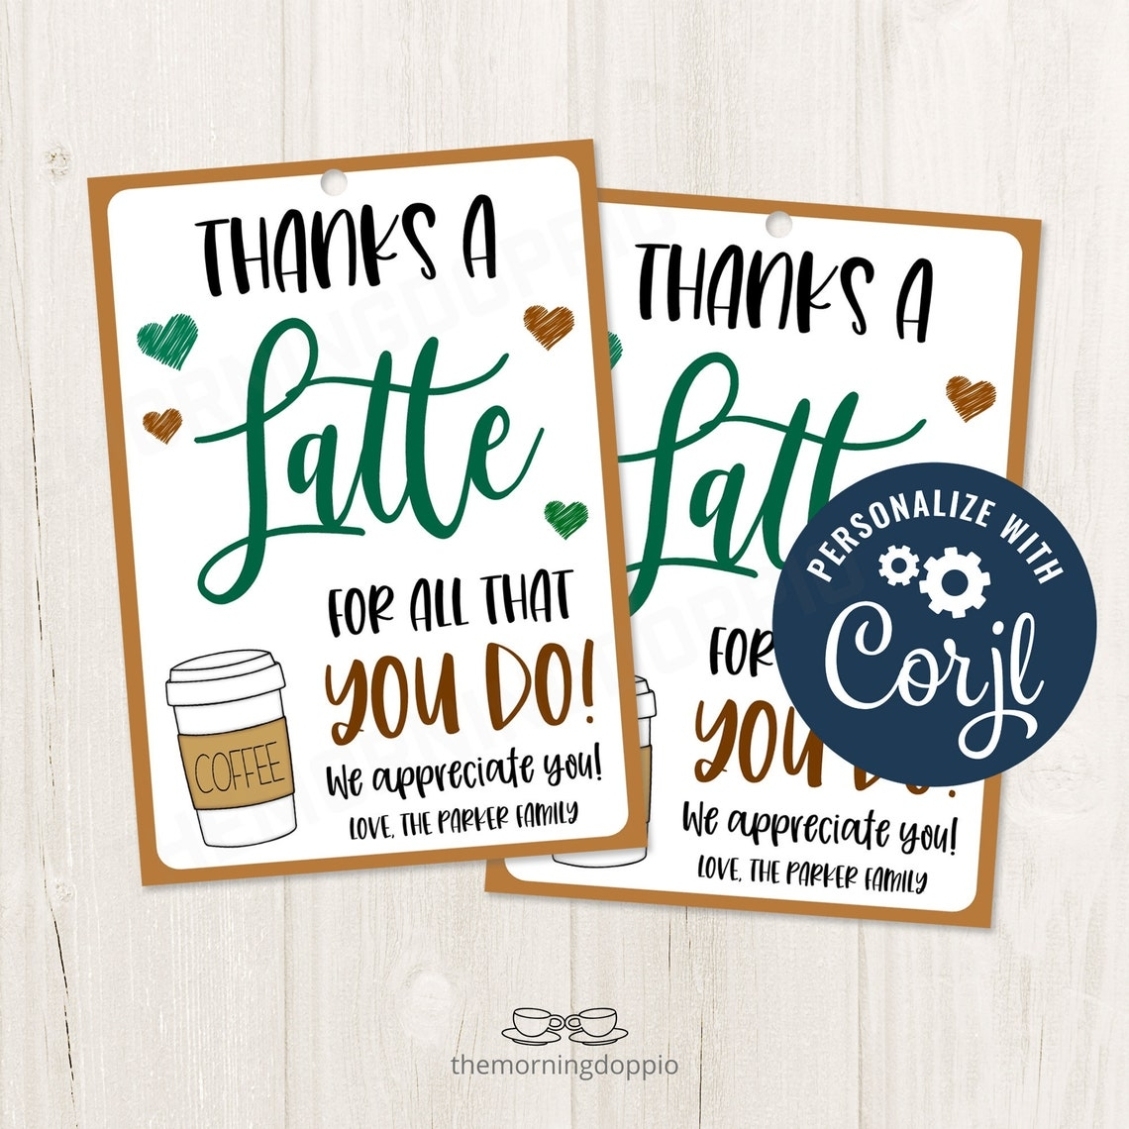 Printable/Editable Thanks A Latte Coffee Gif Tag For Teachers – Etsy Within Thanks A Latte Card Template